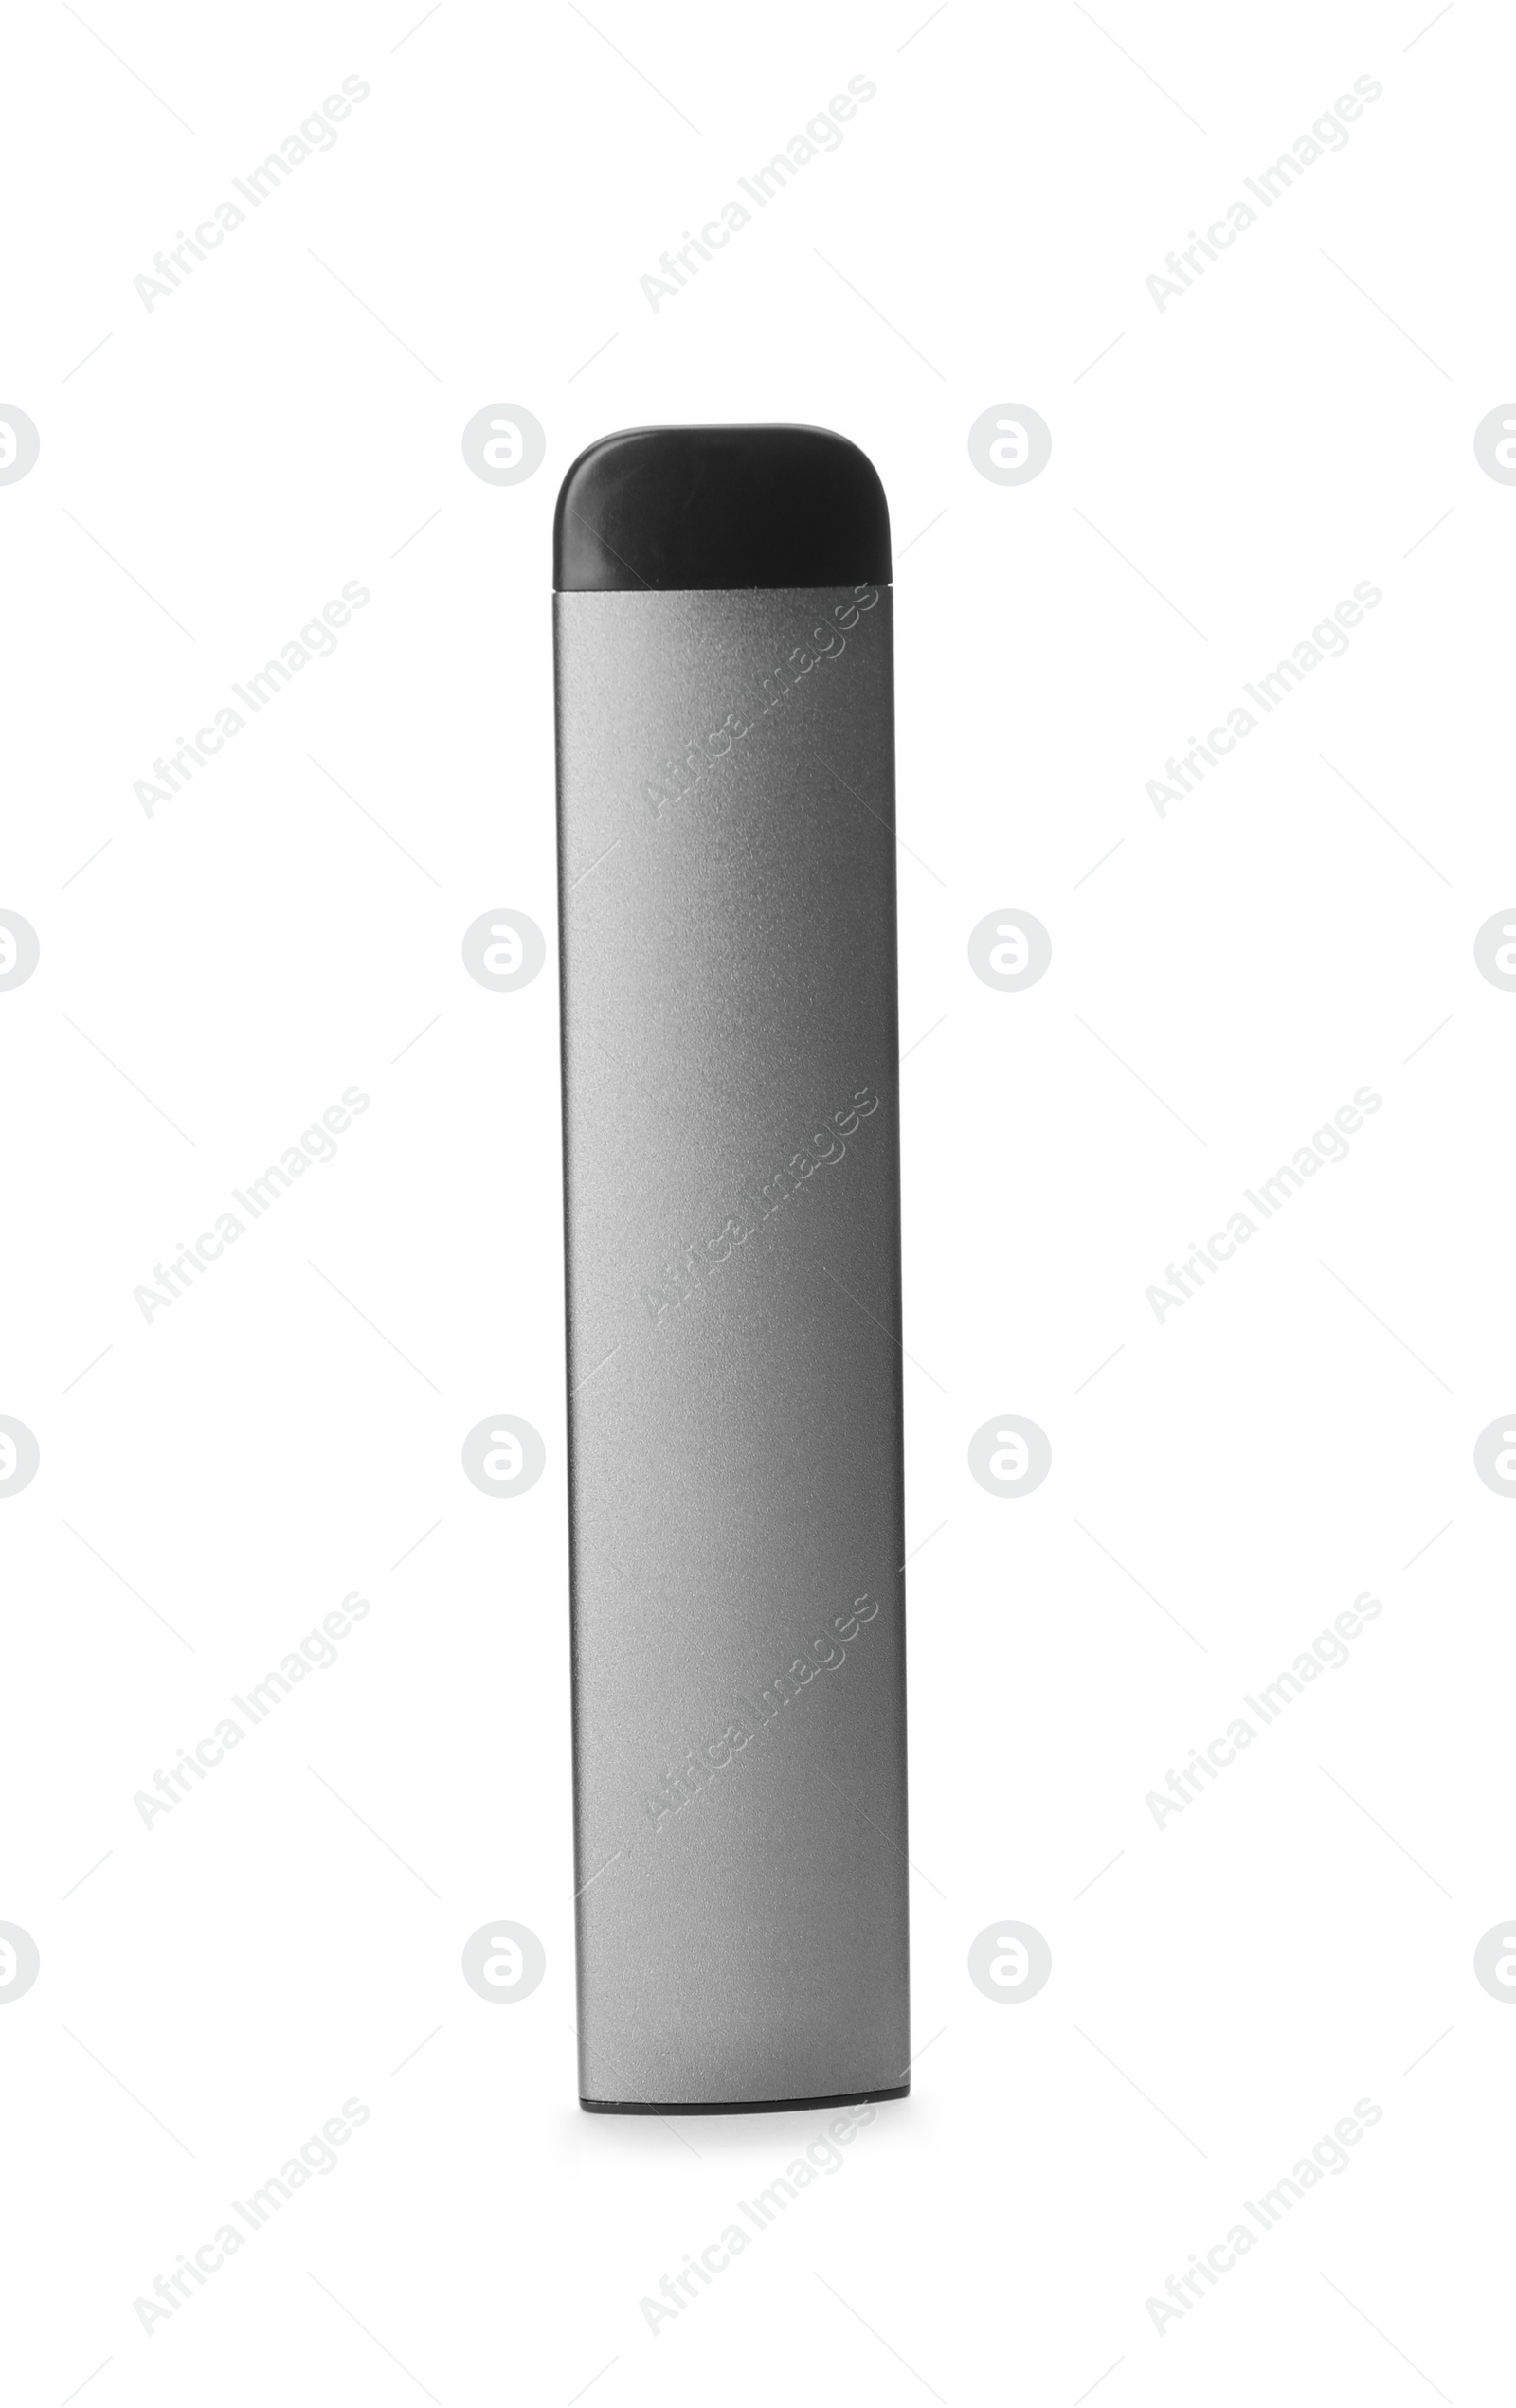 Photo of Disposable electronic smoking device isolated on white